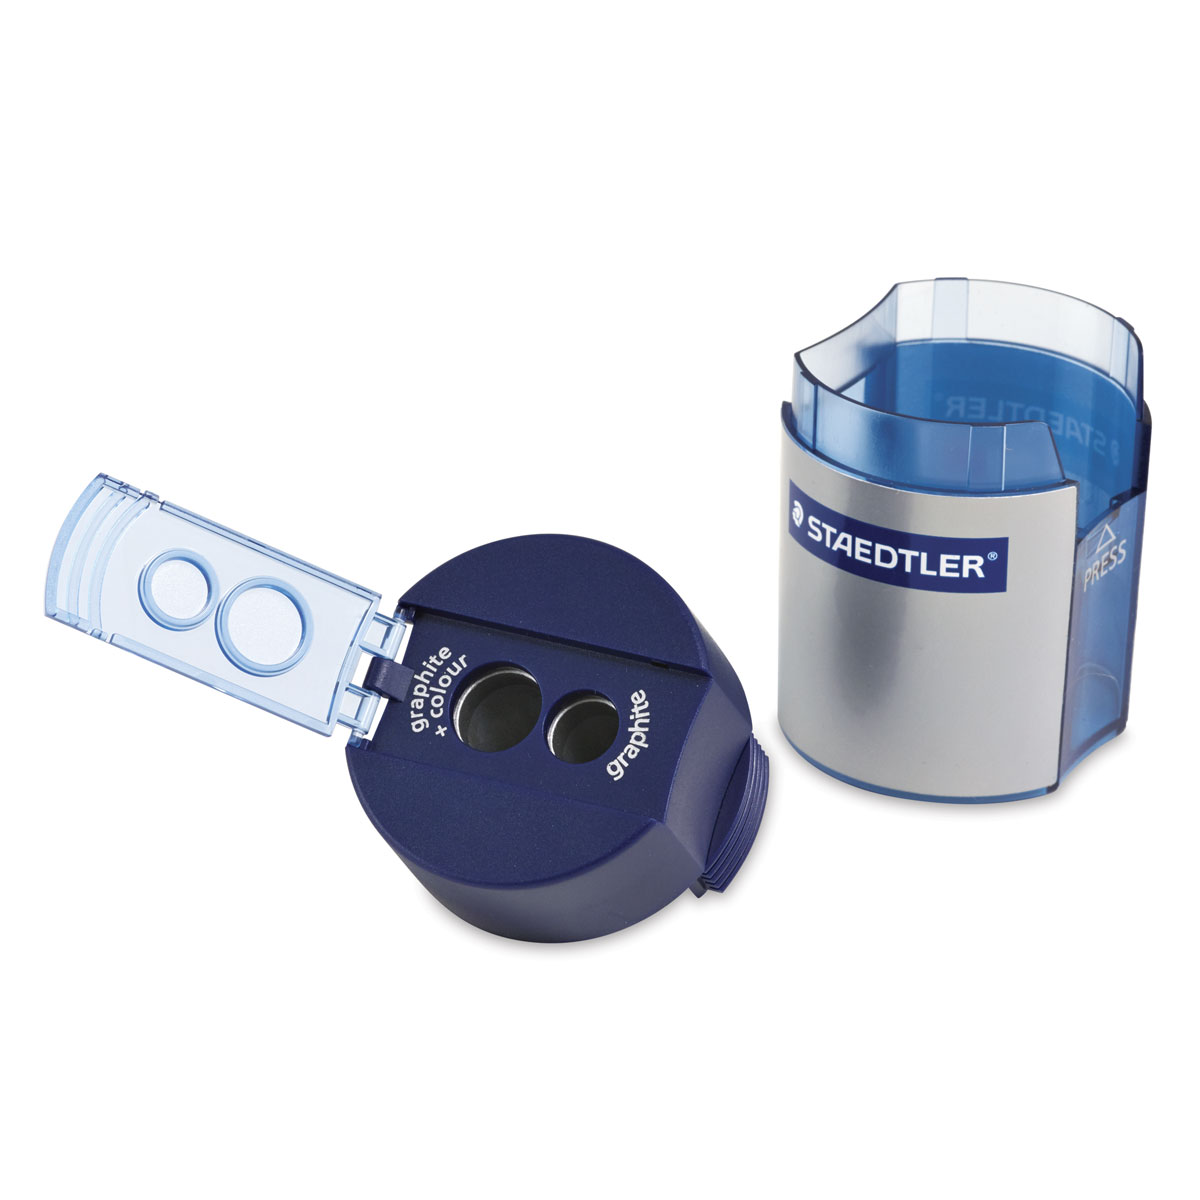 1-2/3 x 2-1/4 x 1-2/3 Inches Silver/Blue Staedtler Dual Hole Pencil Sharpener 